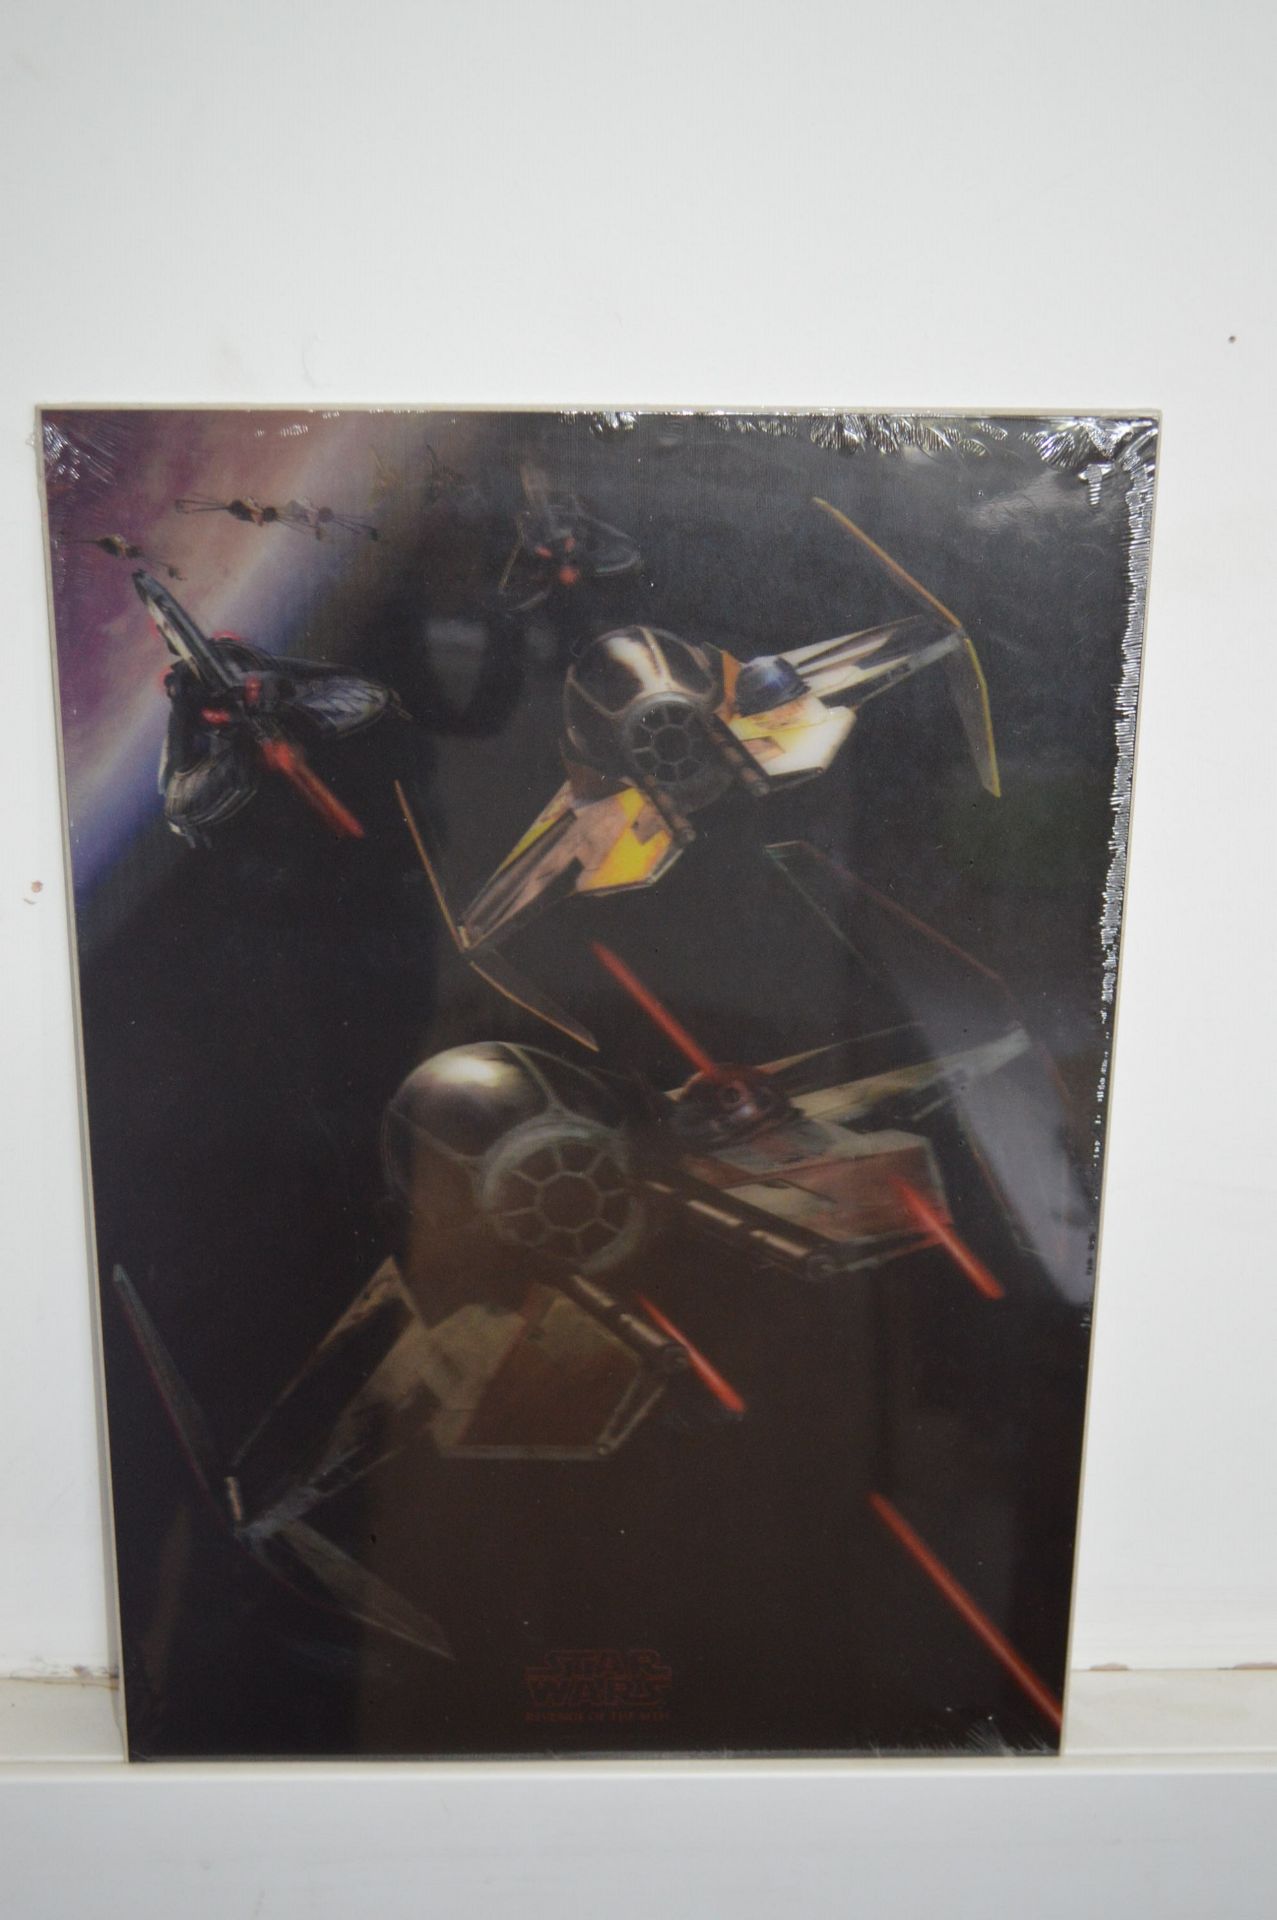 LIMITED EDITION STAR WARS 3D LITHOGRAPHIC PRINT WITH CERTIFICATE OF AUTHENTICITY - Bild 4 aus 4